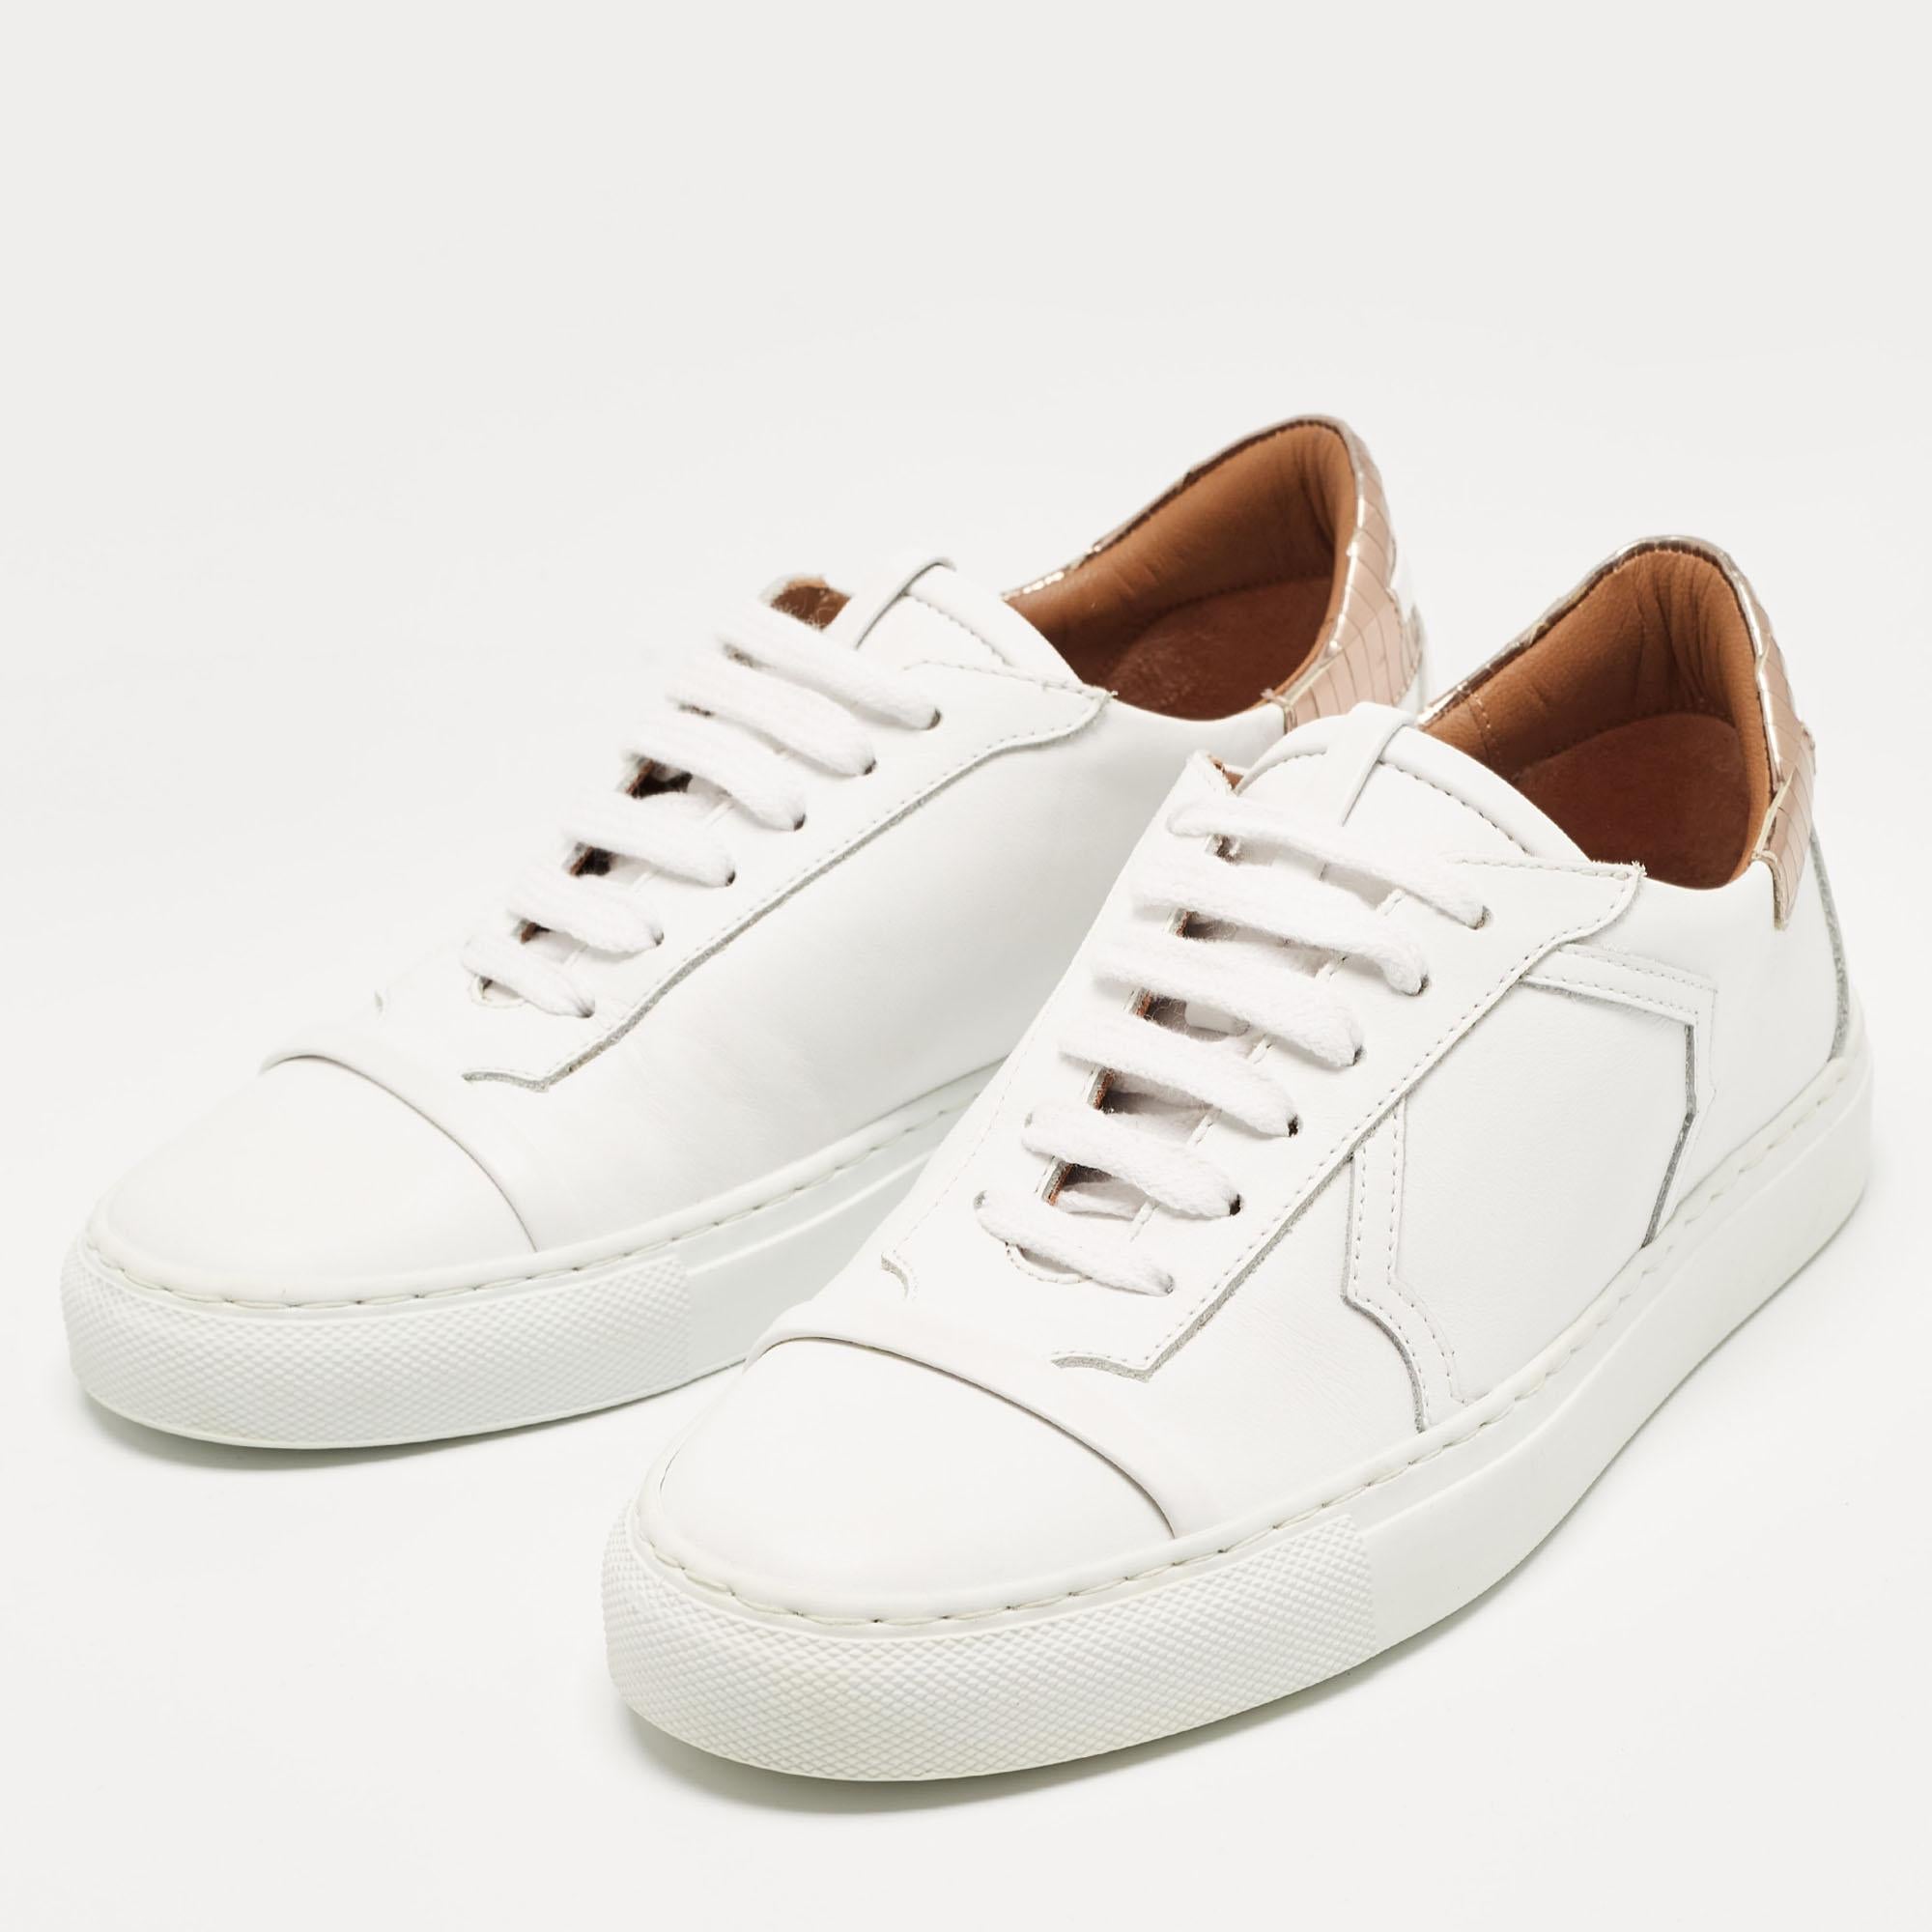 Malone Souliers White/Rose Gold Leather Musa Sneakers Size 36 For Sale 4